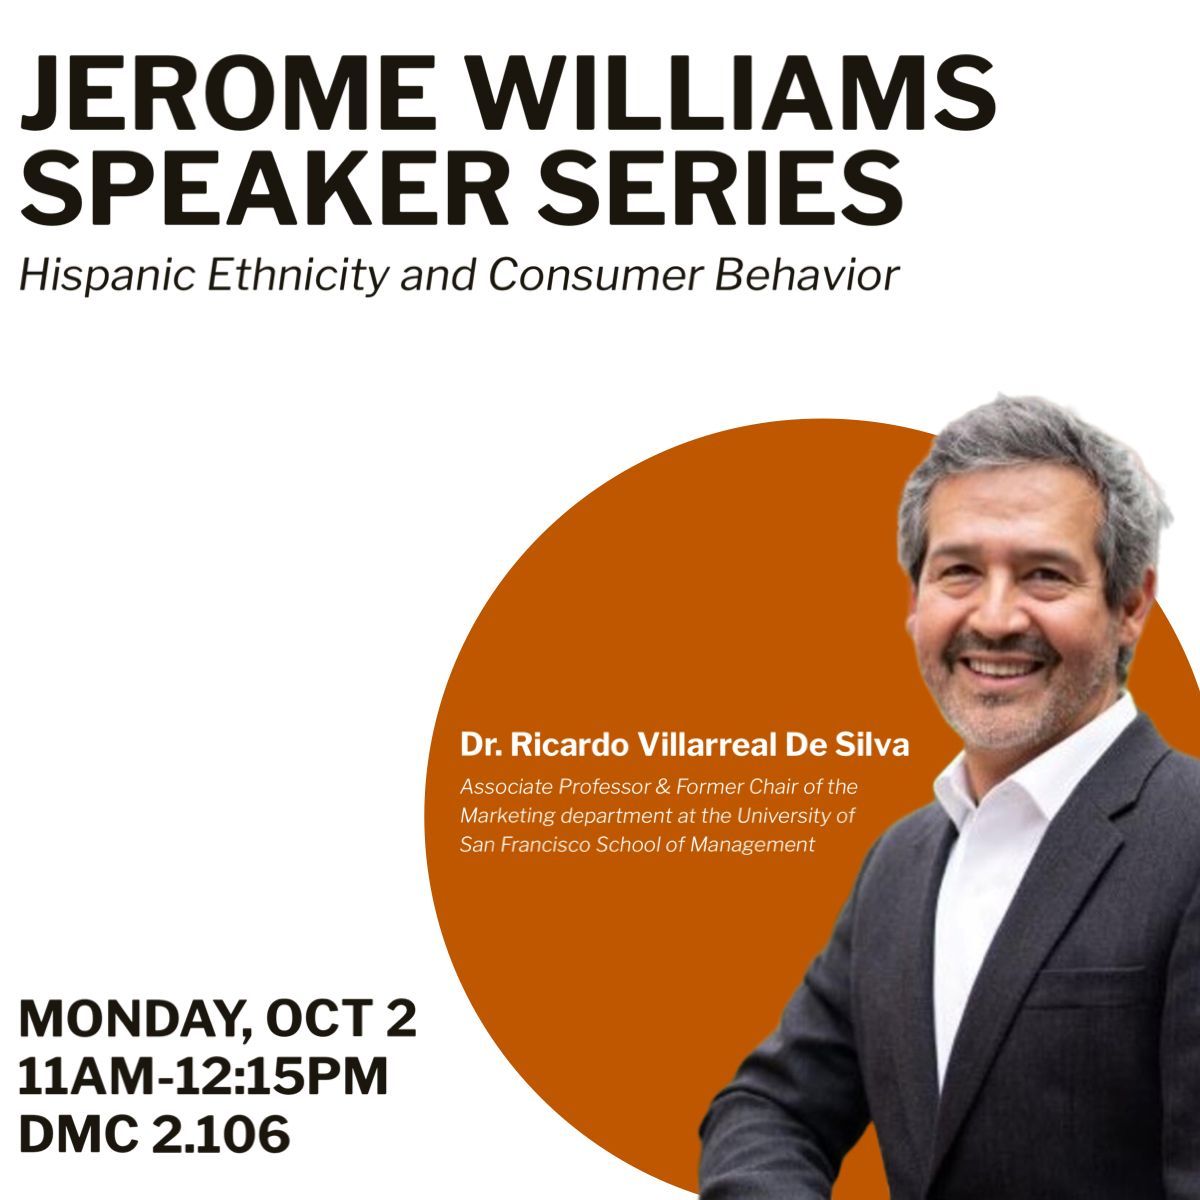 Join @texasmoody in honor of #HispanicHeritageMonth! Dr. Ricardo Villarreal De Silva will be hosting a lecture + panel on how self identity relates to brands and branding. The first lecture is open to all today at 11am, you don't want to miss this!